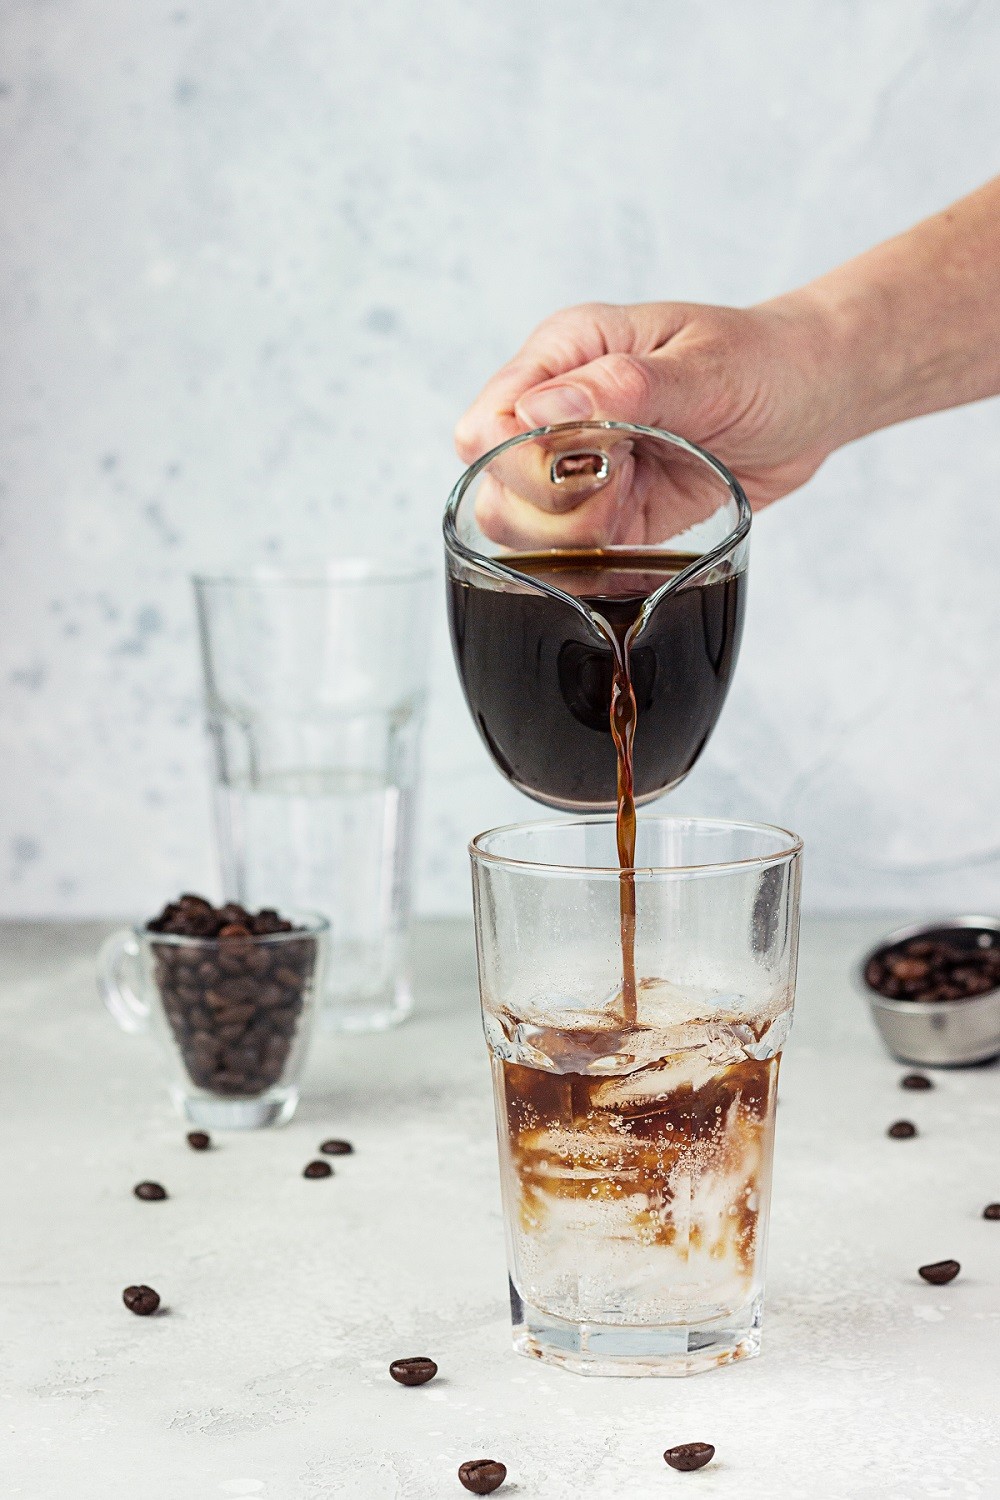 Pouring espresso into a tall glass with tonic and ice cubes, light grey stone background. Making tonic iced coffee. Refreshment summer drink.